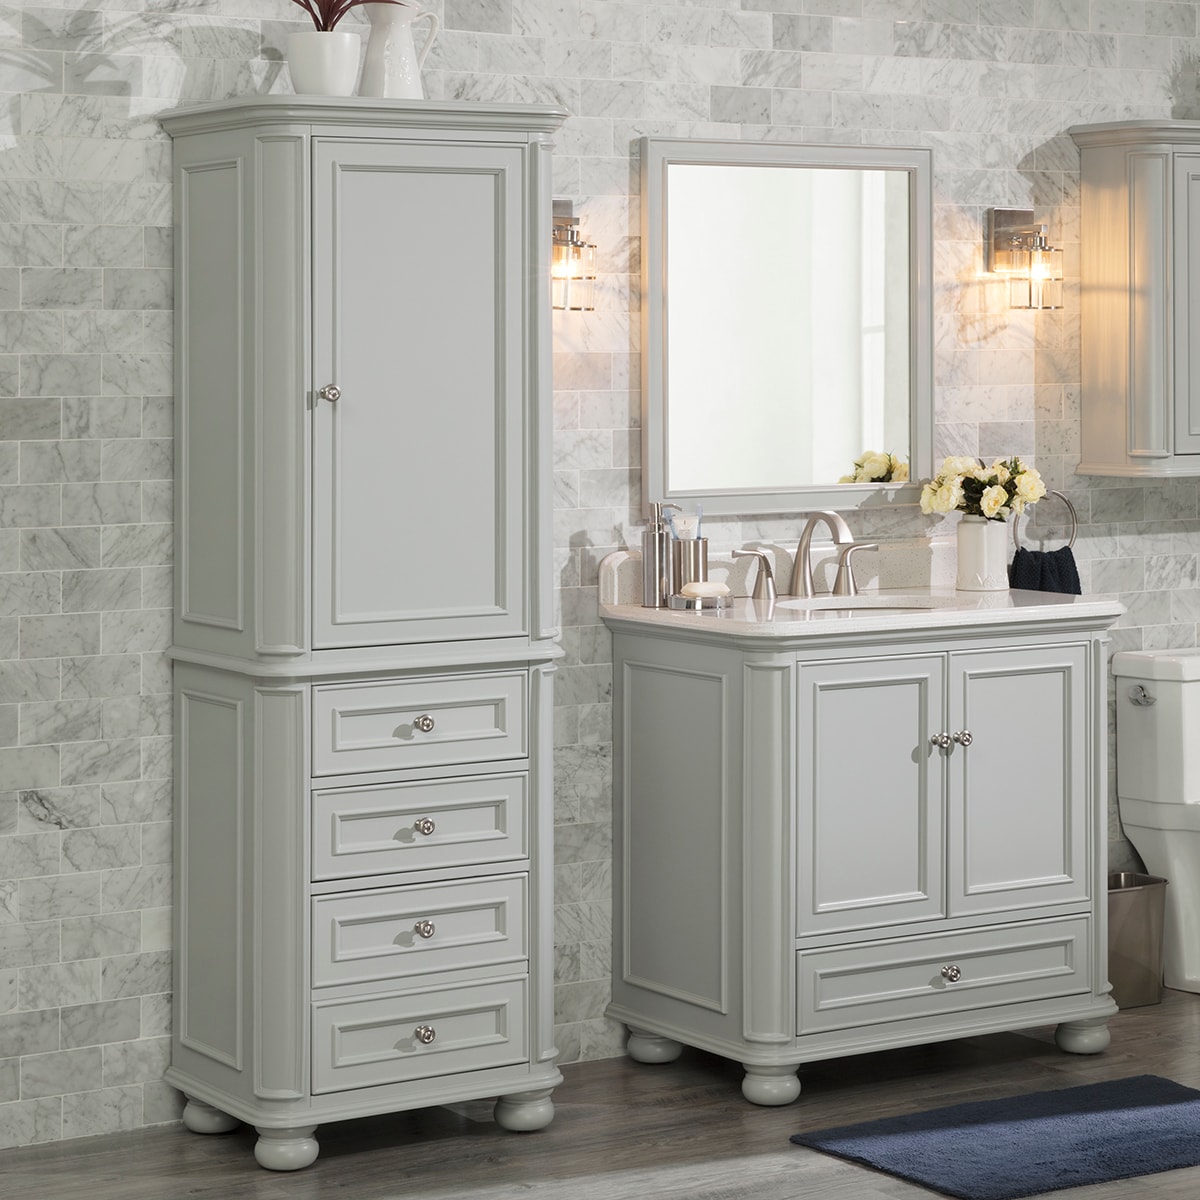 Linen Cabinets At Com, 36 Vanity With Matching Linen Cabinet